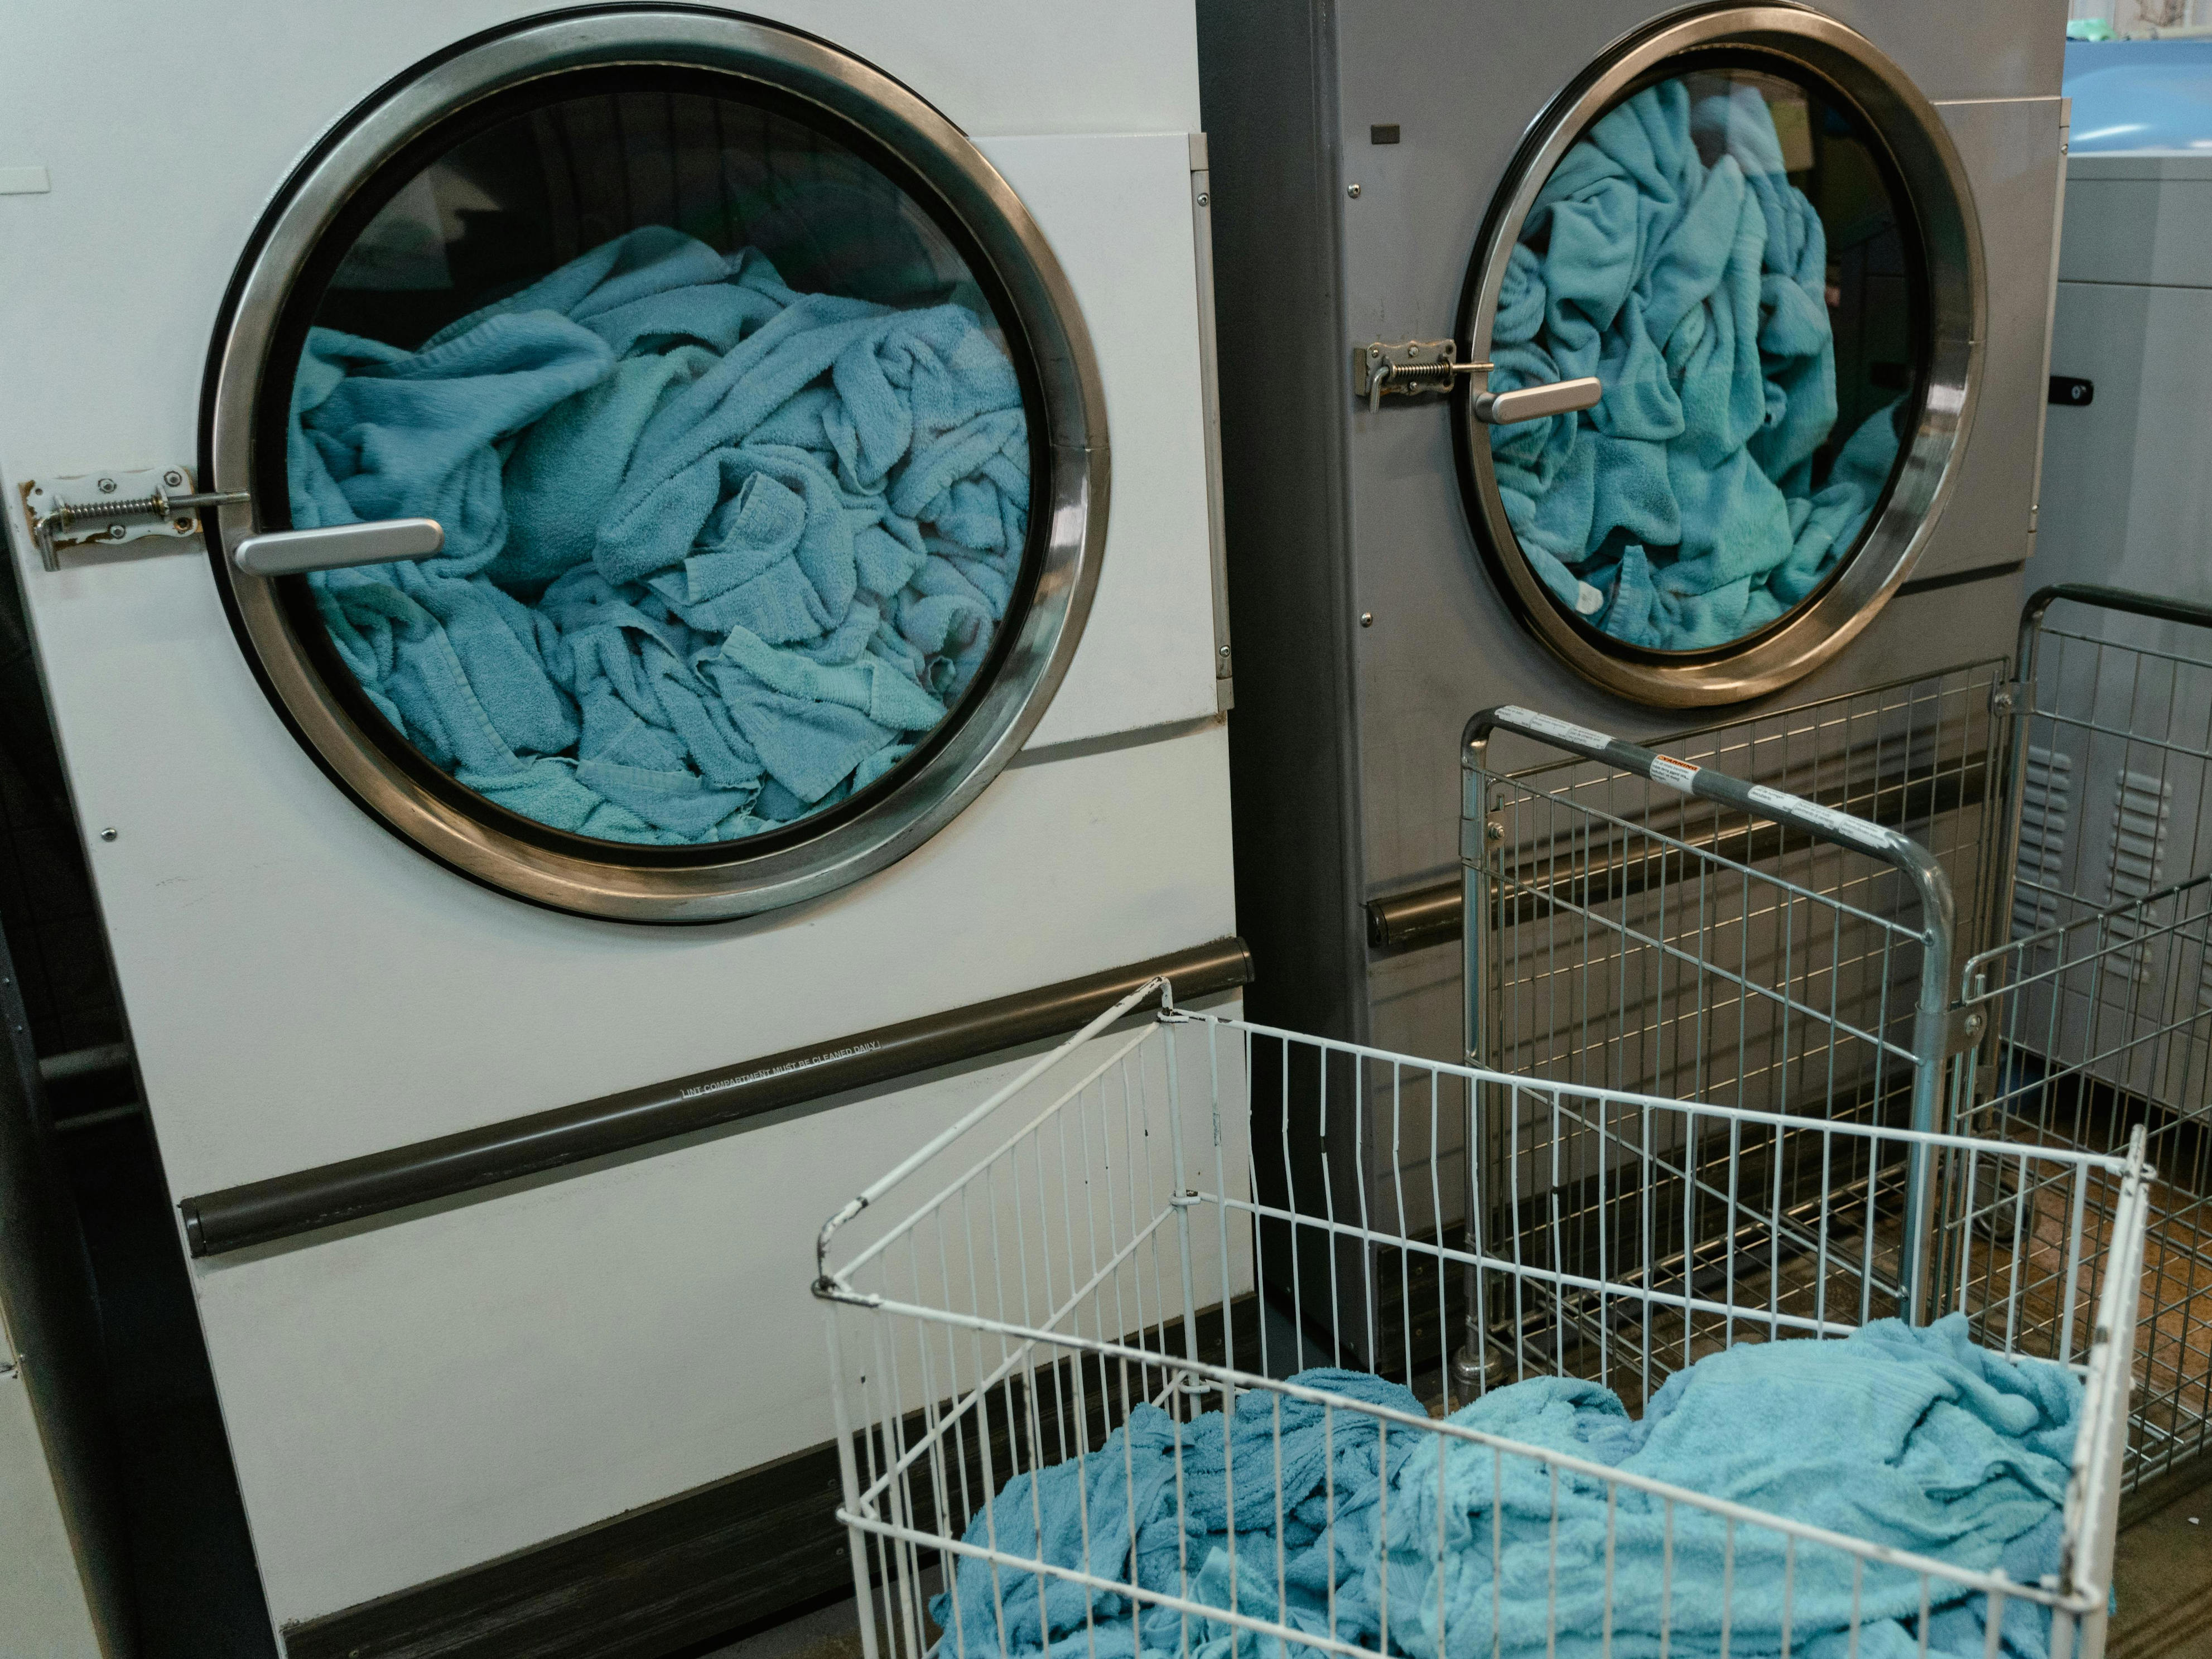 <p>Take advantage of hotel laundry services to minimize the amount of clothing you need to pack. This allows you to bring fewer items and still have clean clothes throughout your trip. Itâs especially useful for longer stays. It also means you can pack lighter and focus on versatile pieces.</p>